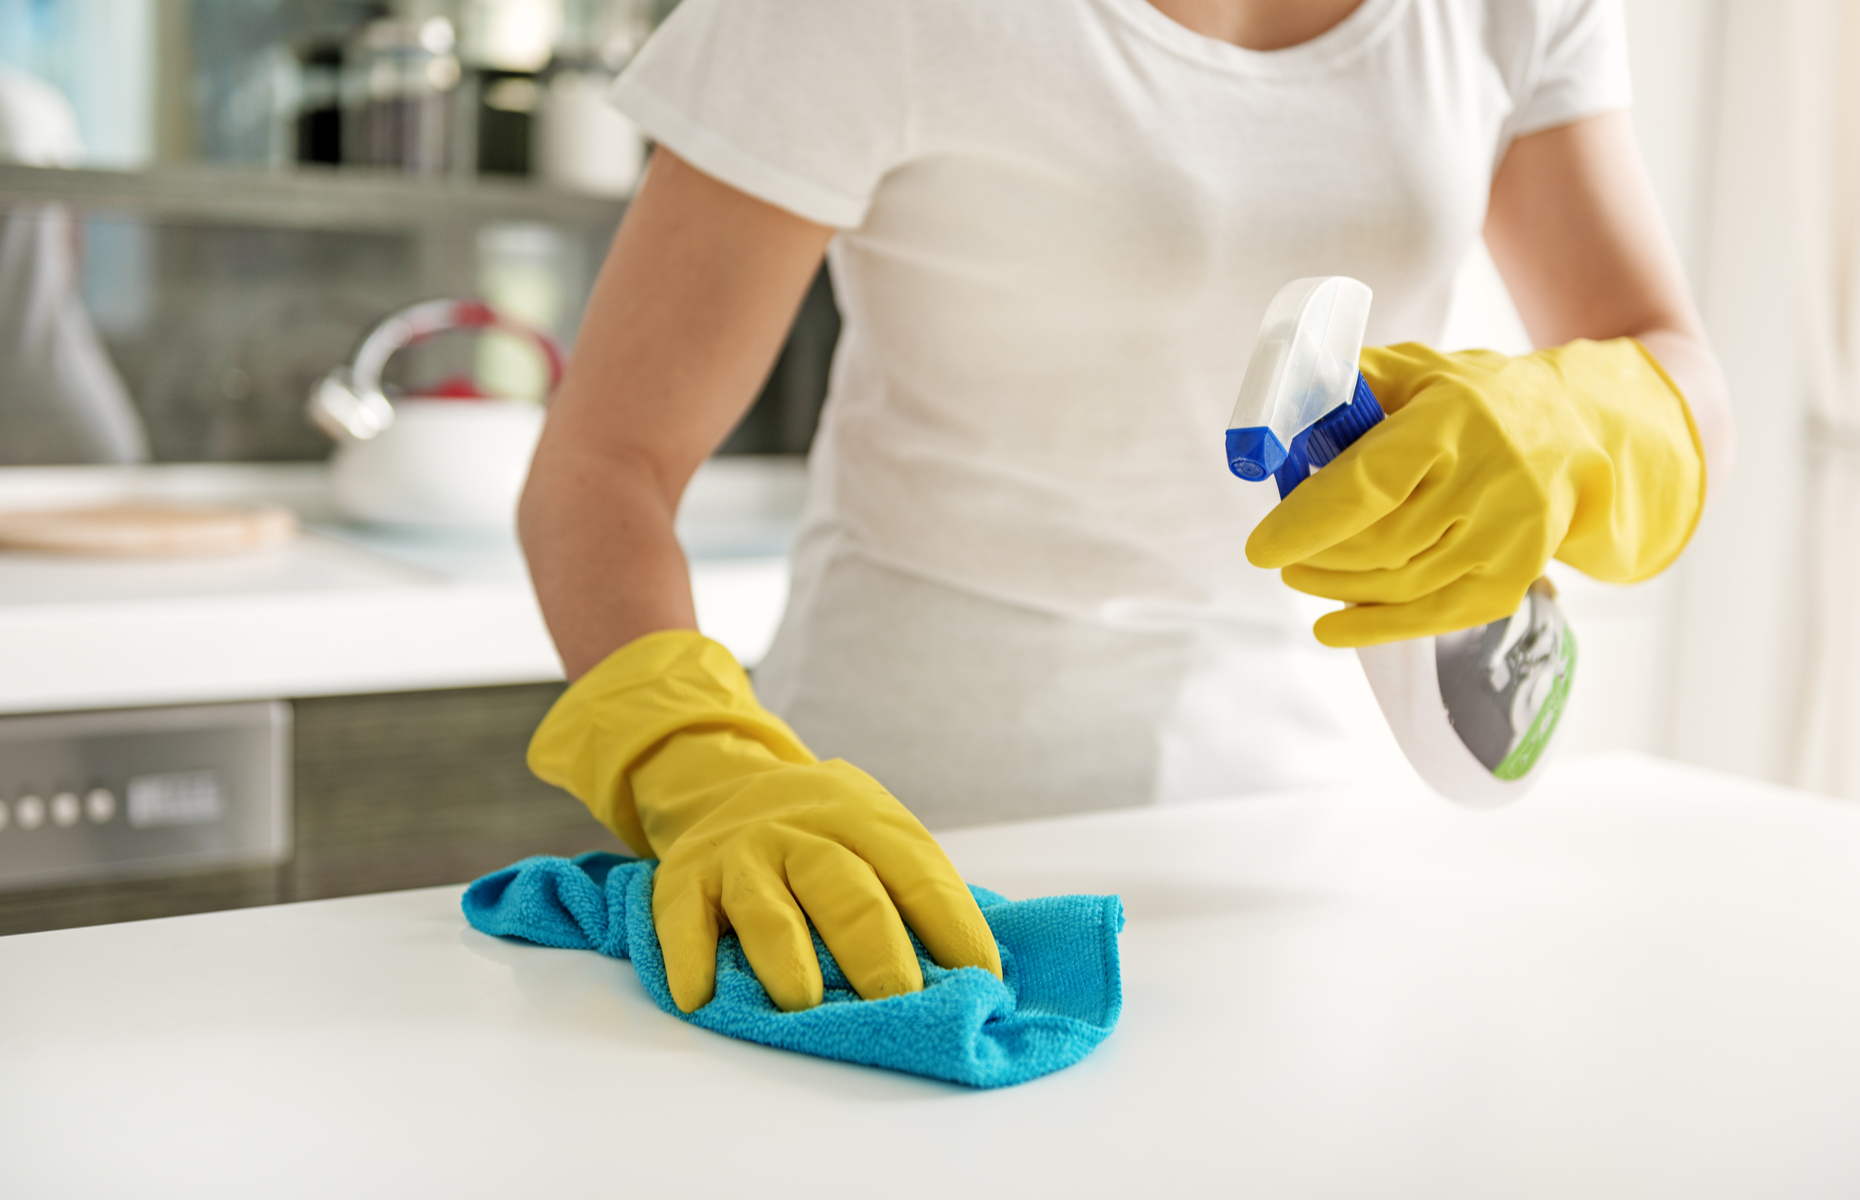 Disinfecting surfaces removes harmful microbes that are invisible to the eye. Image: Olena Yakobchuk/Shutterstock